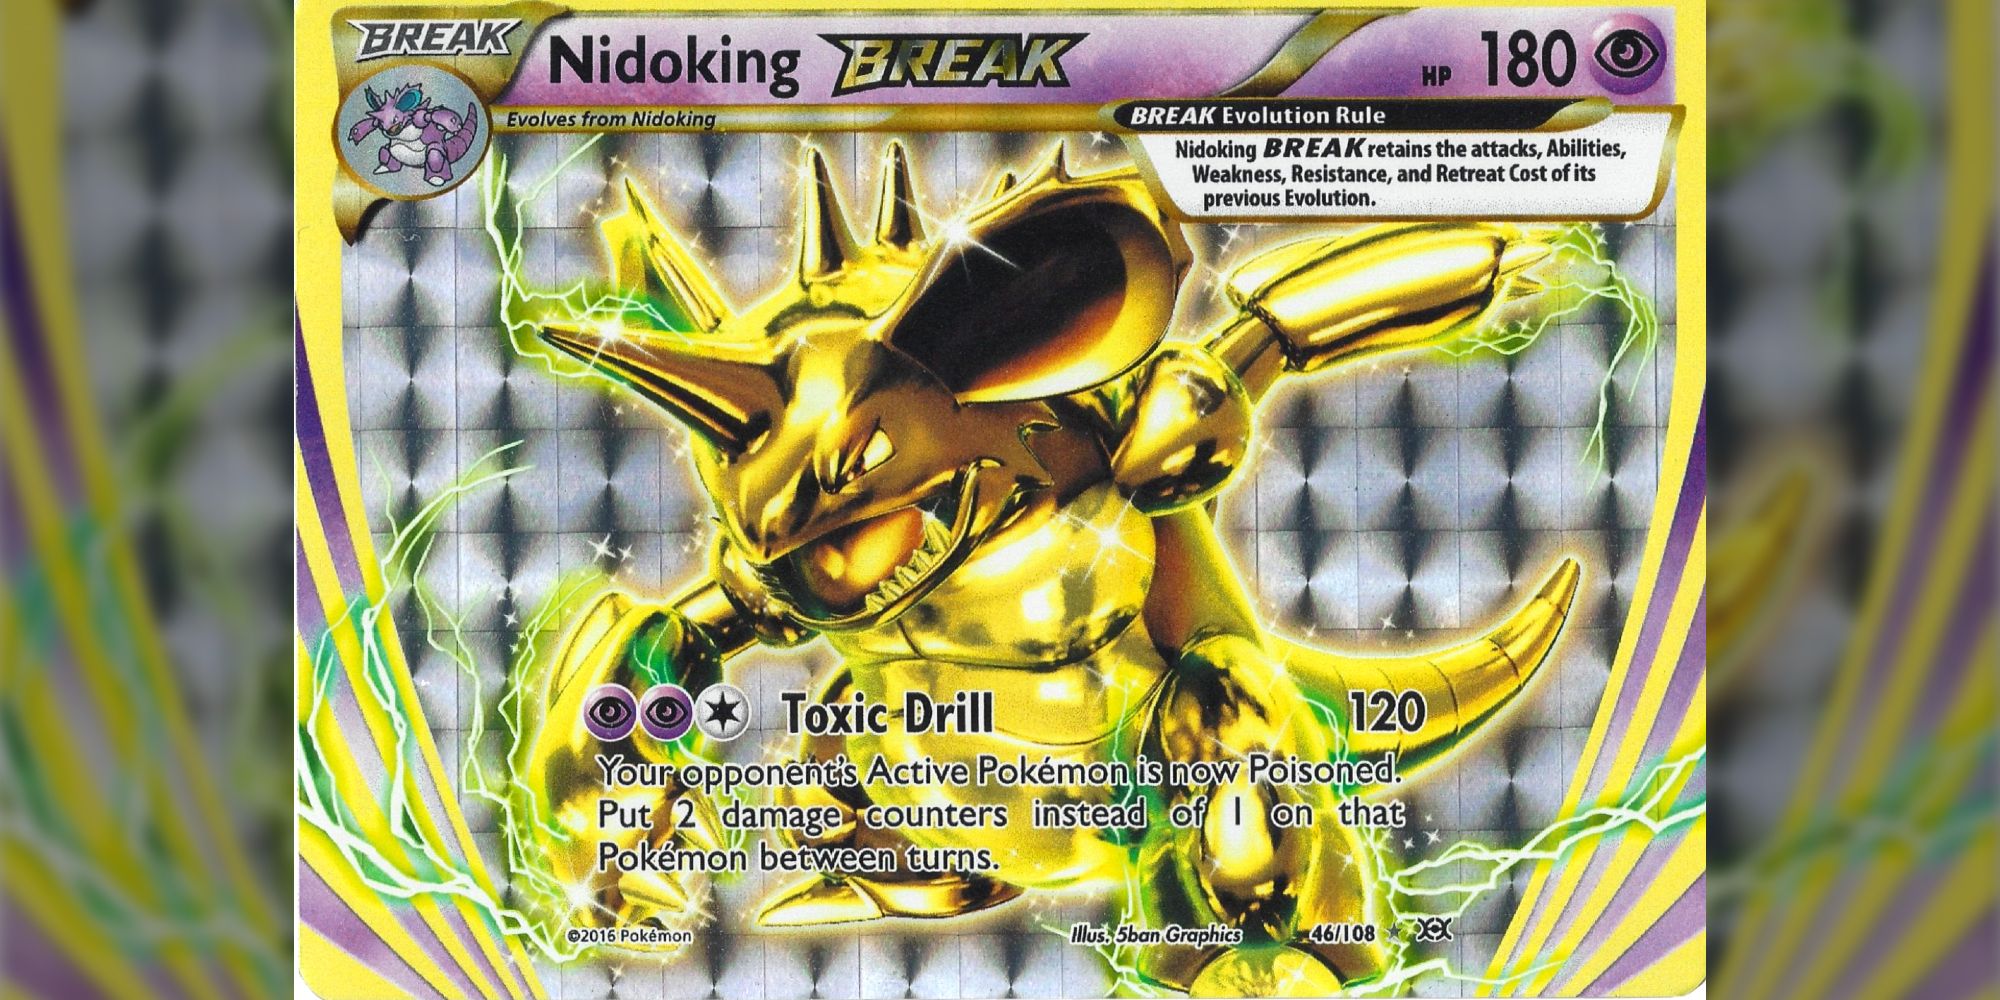 the poison pokemon in the tcg as a gold psychic type.